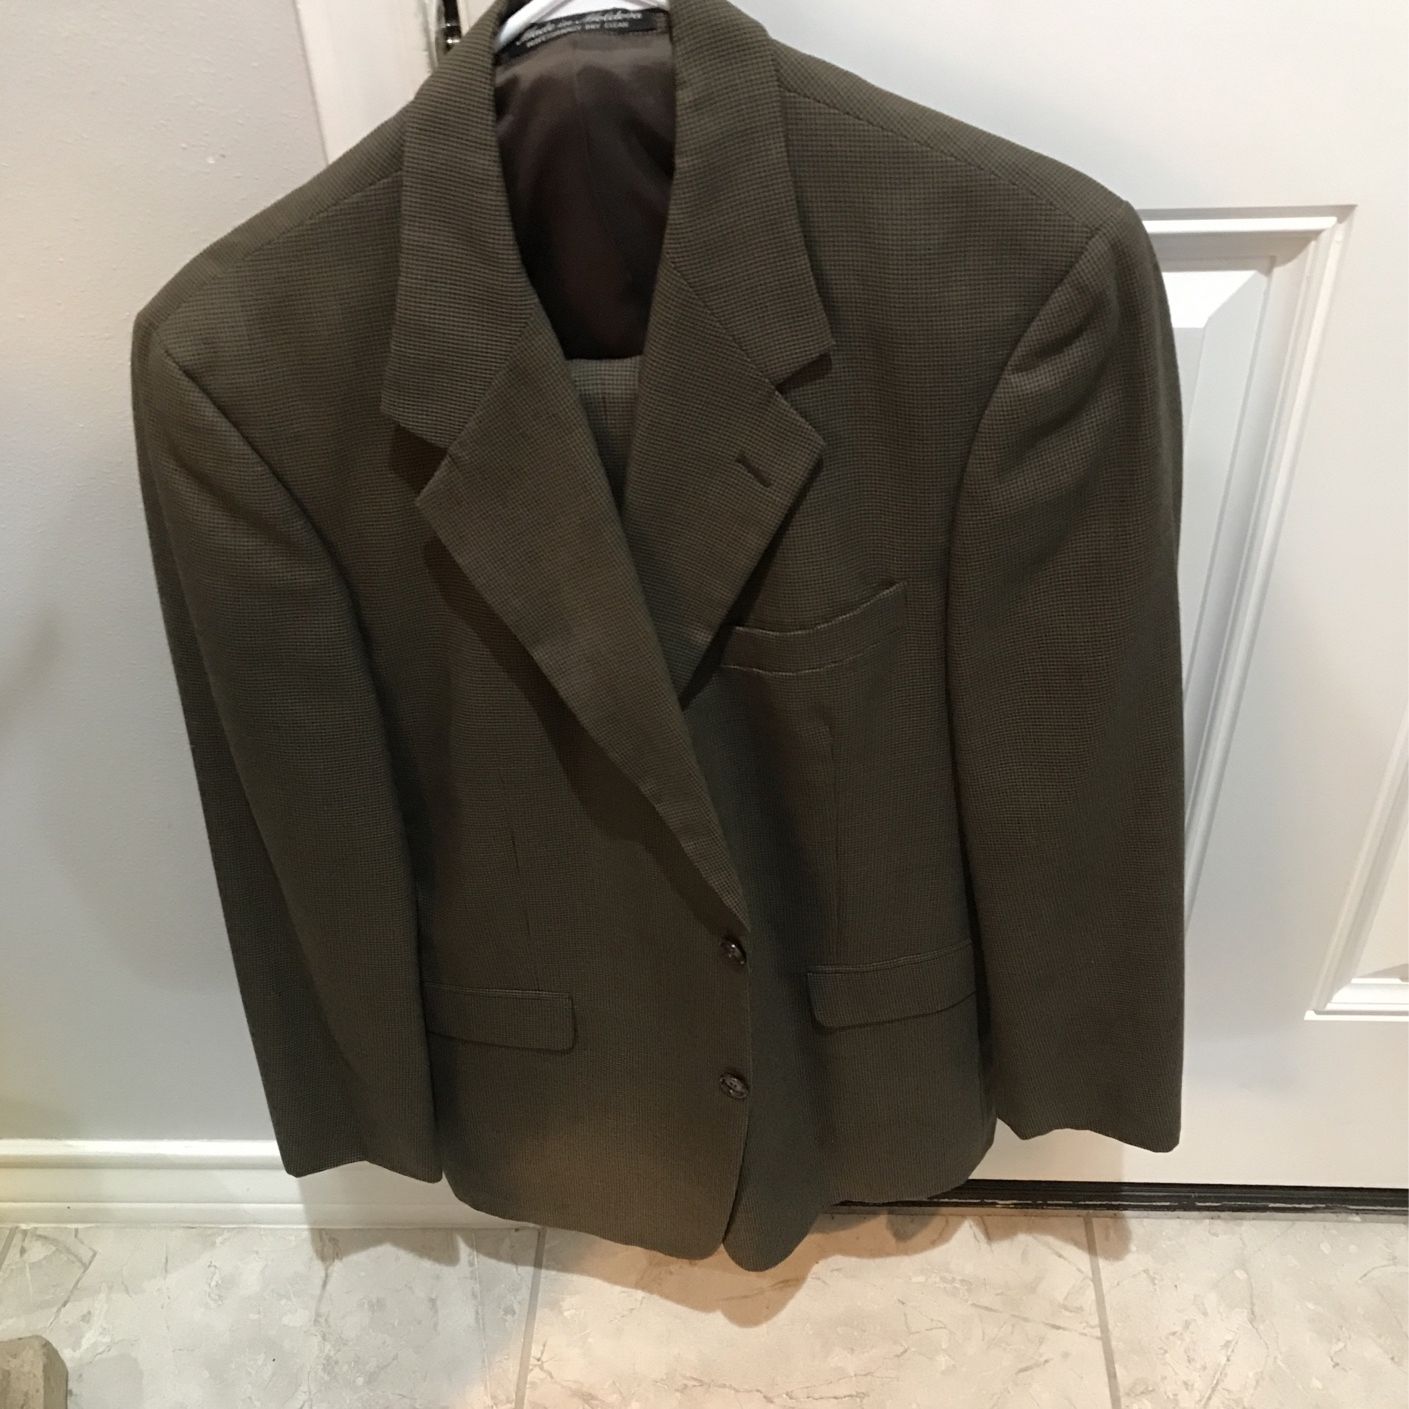 Very Nice Green With Small Black Checks Suit Coat (38R) + Pants (31/32R)